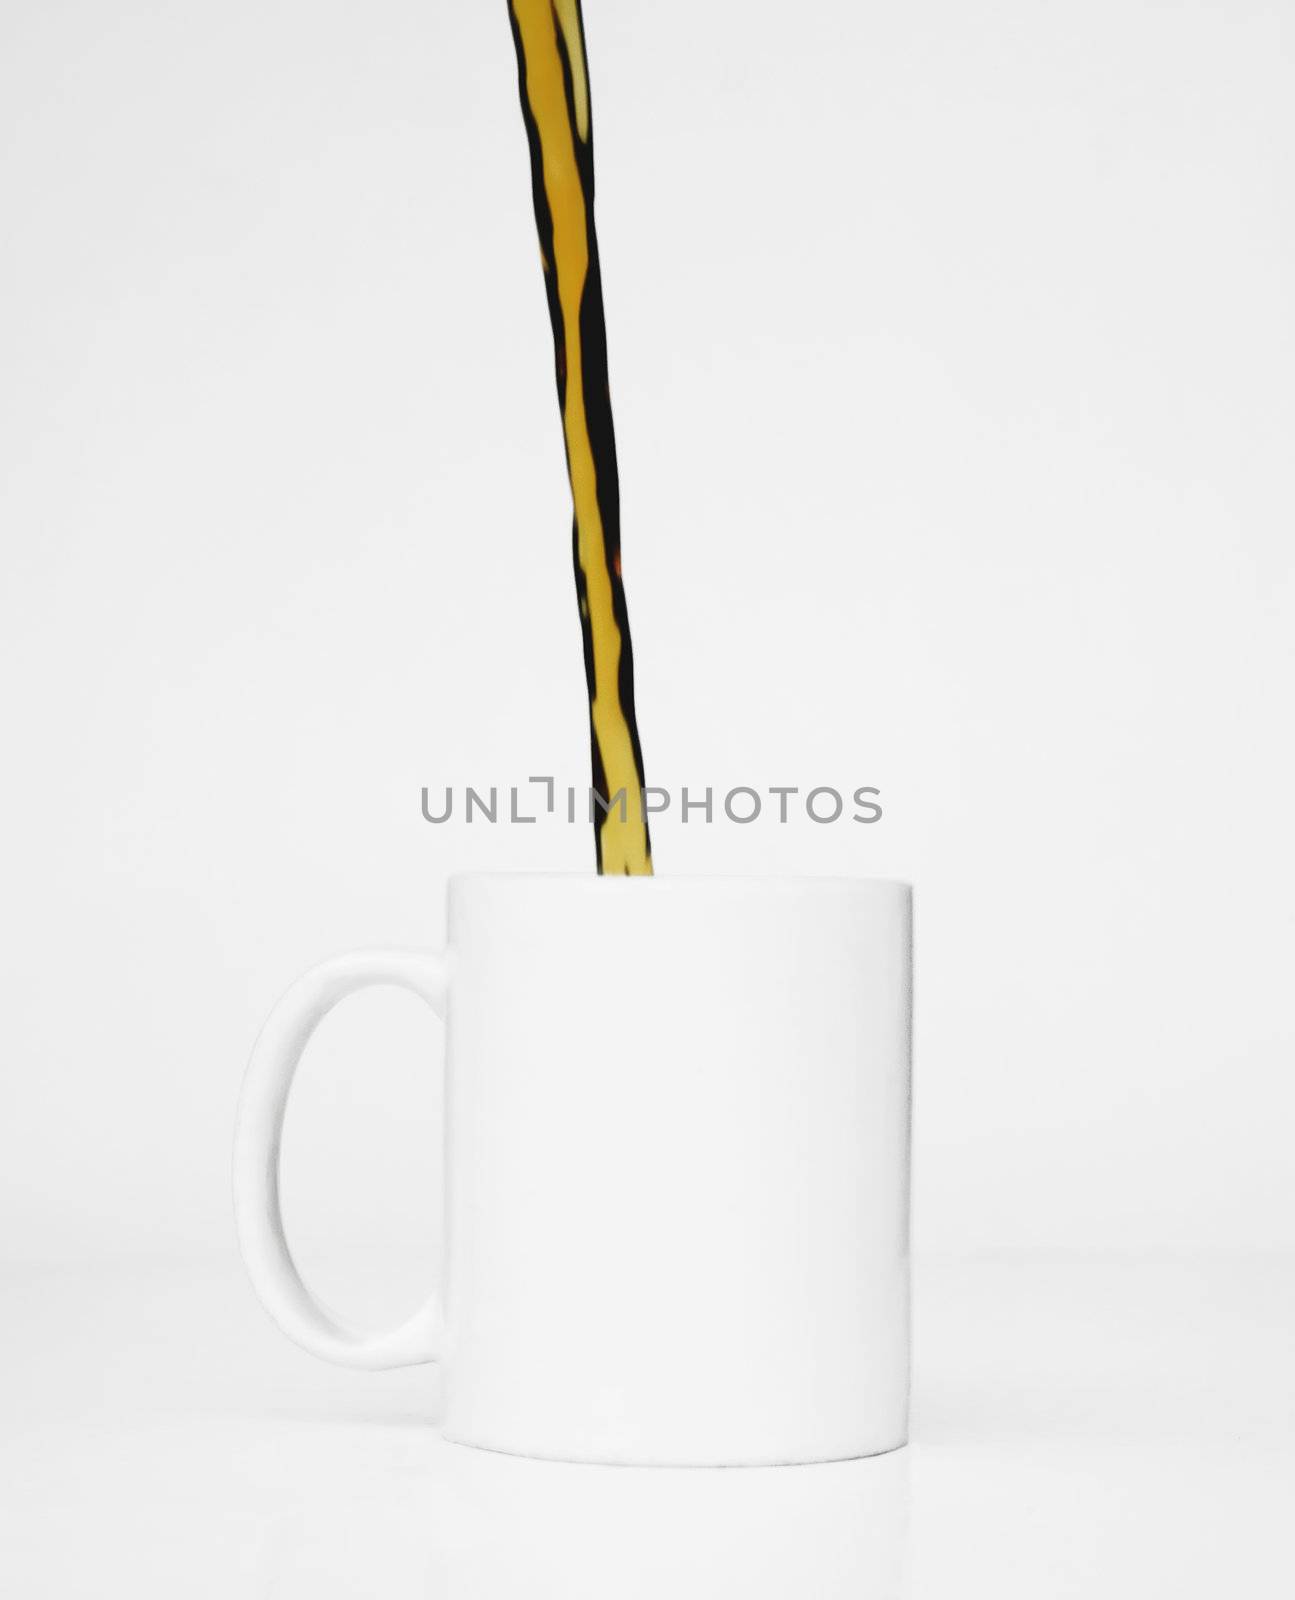 Streeam of coffee pours into a white mug against a white background.